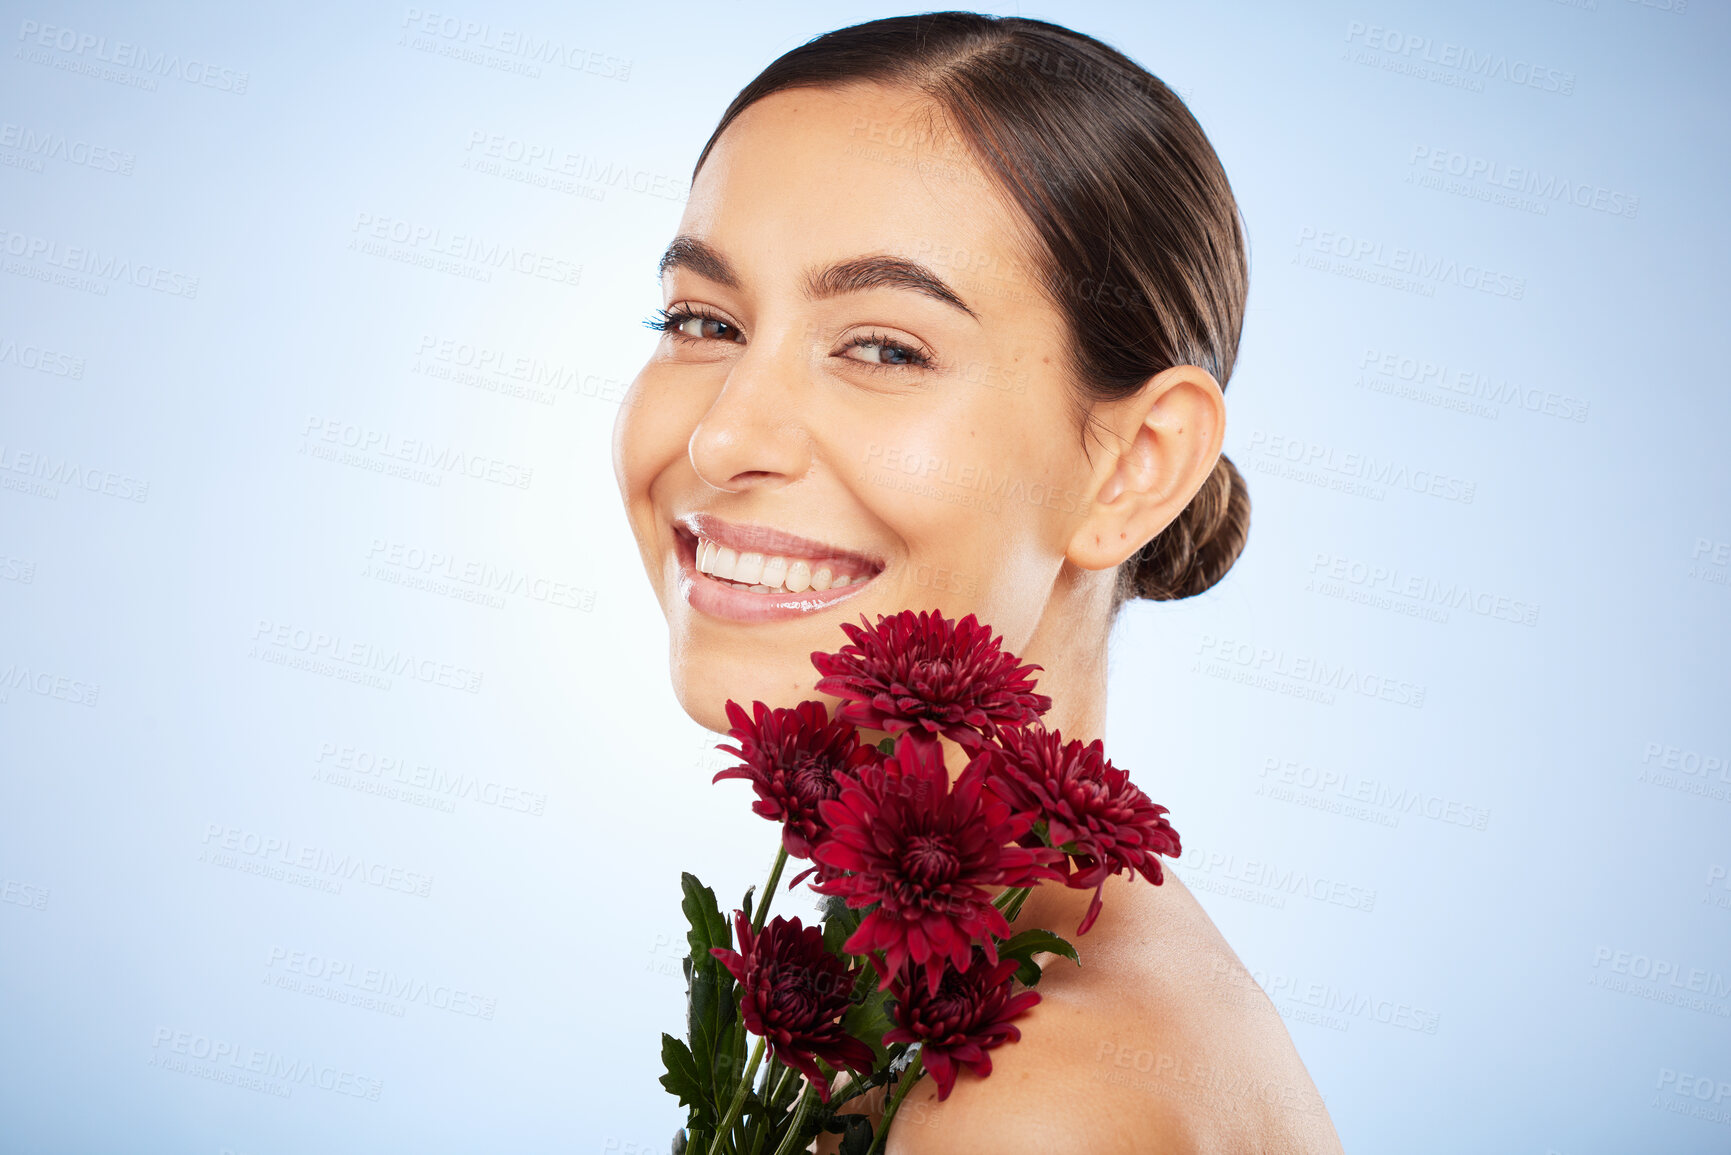 Buy stock photo Skincare, flowers and beauty portrait of woman on studio blue background for healthy skincare, wellness and luxury makeup in Spain. Face, smile and model with floral chrysanthemum for natural perfume